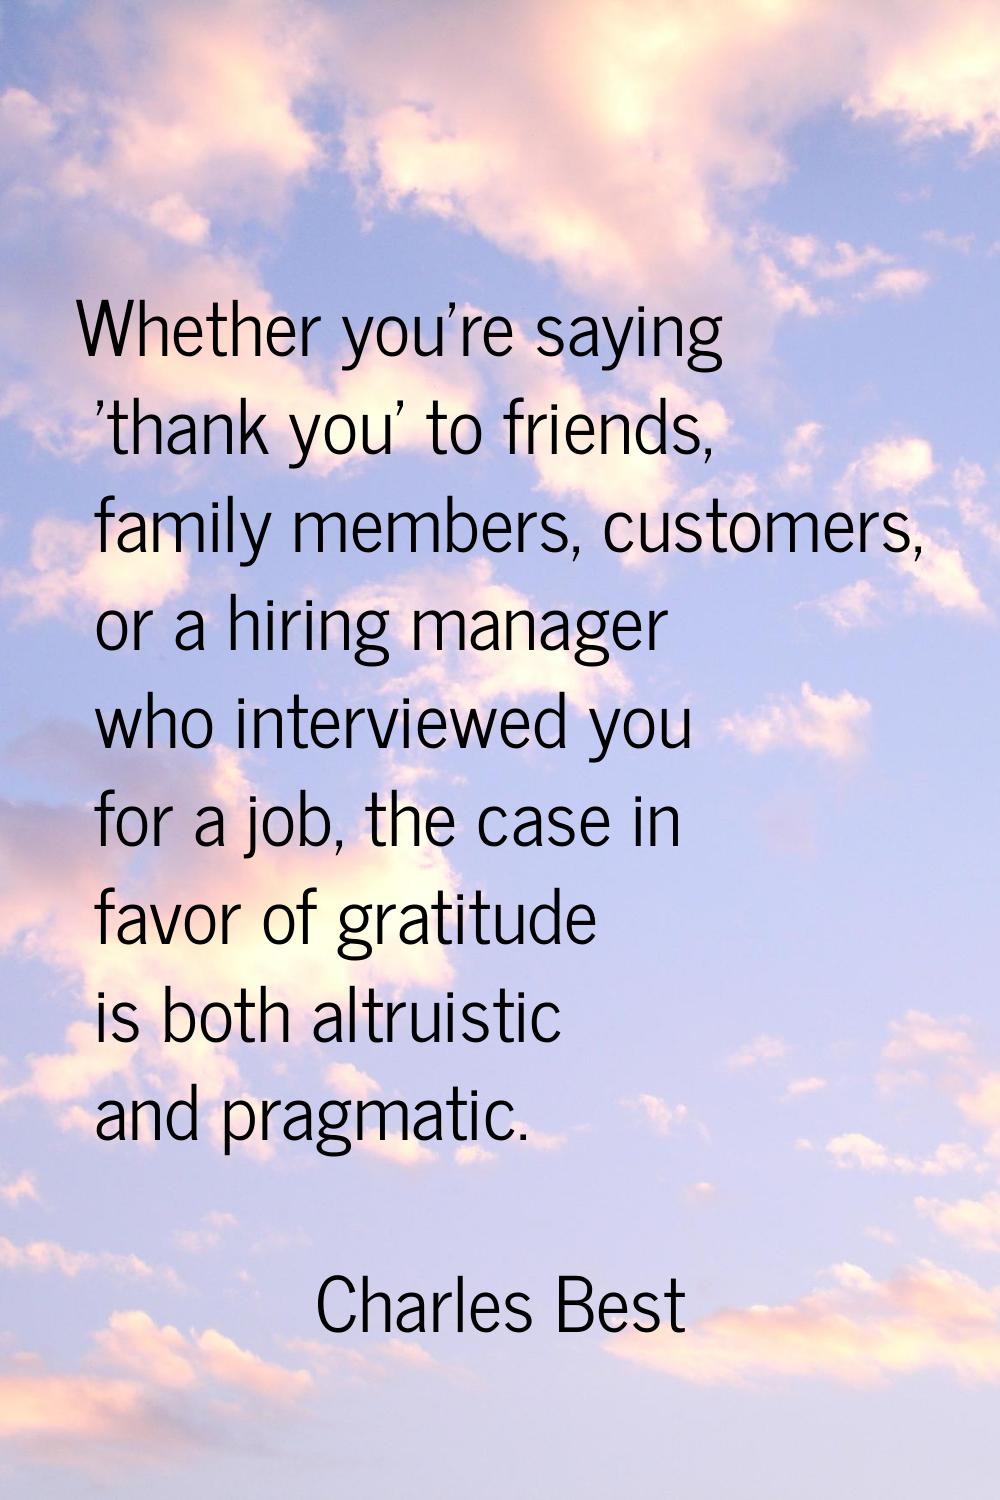 Whether you're saying 'thank you' to friends, family members, customers, or a hiring manager who in